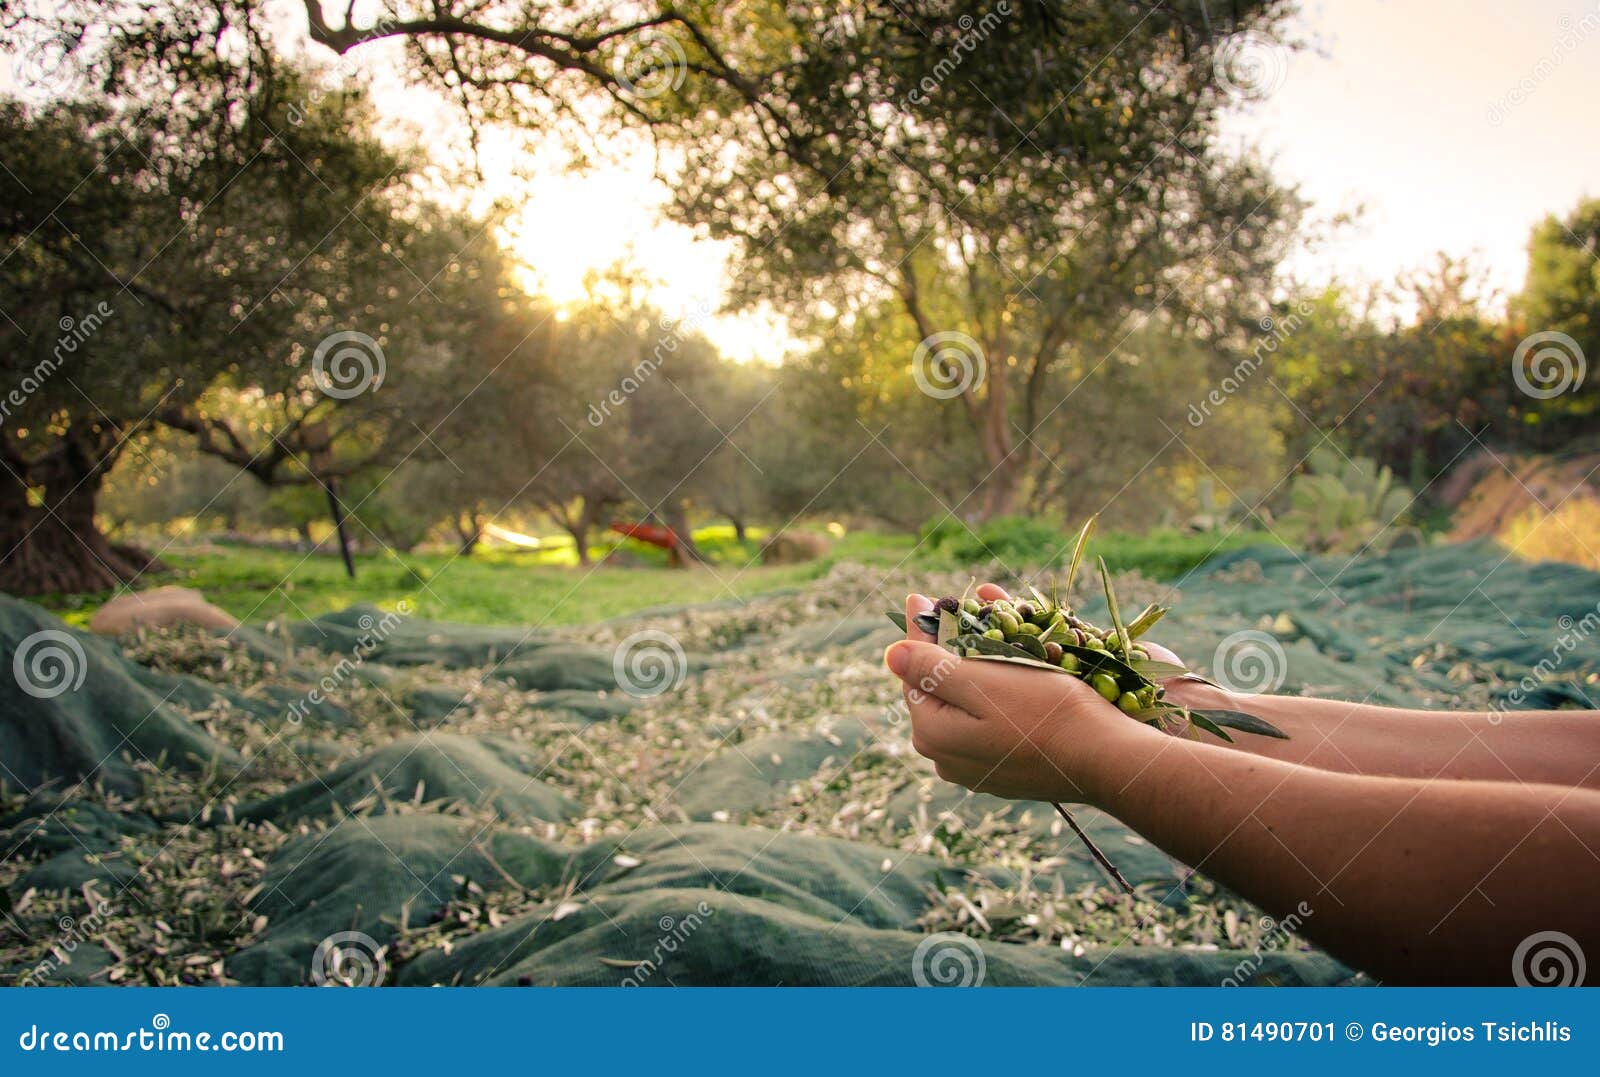 woman keeps in her hands some of harvested fresh olives.